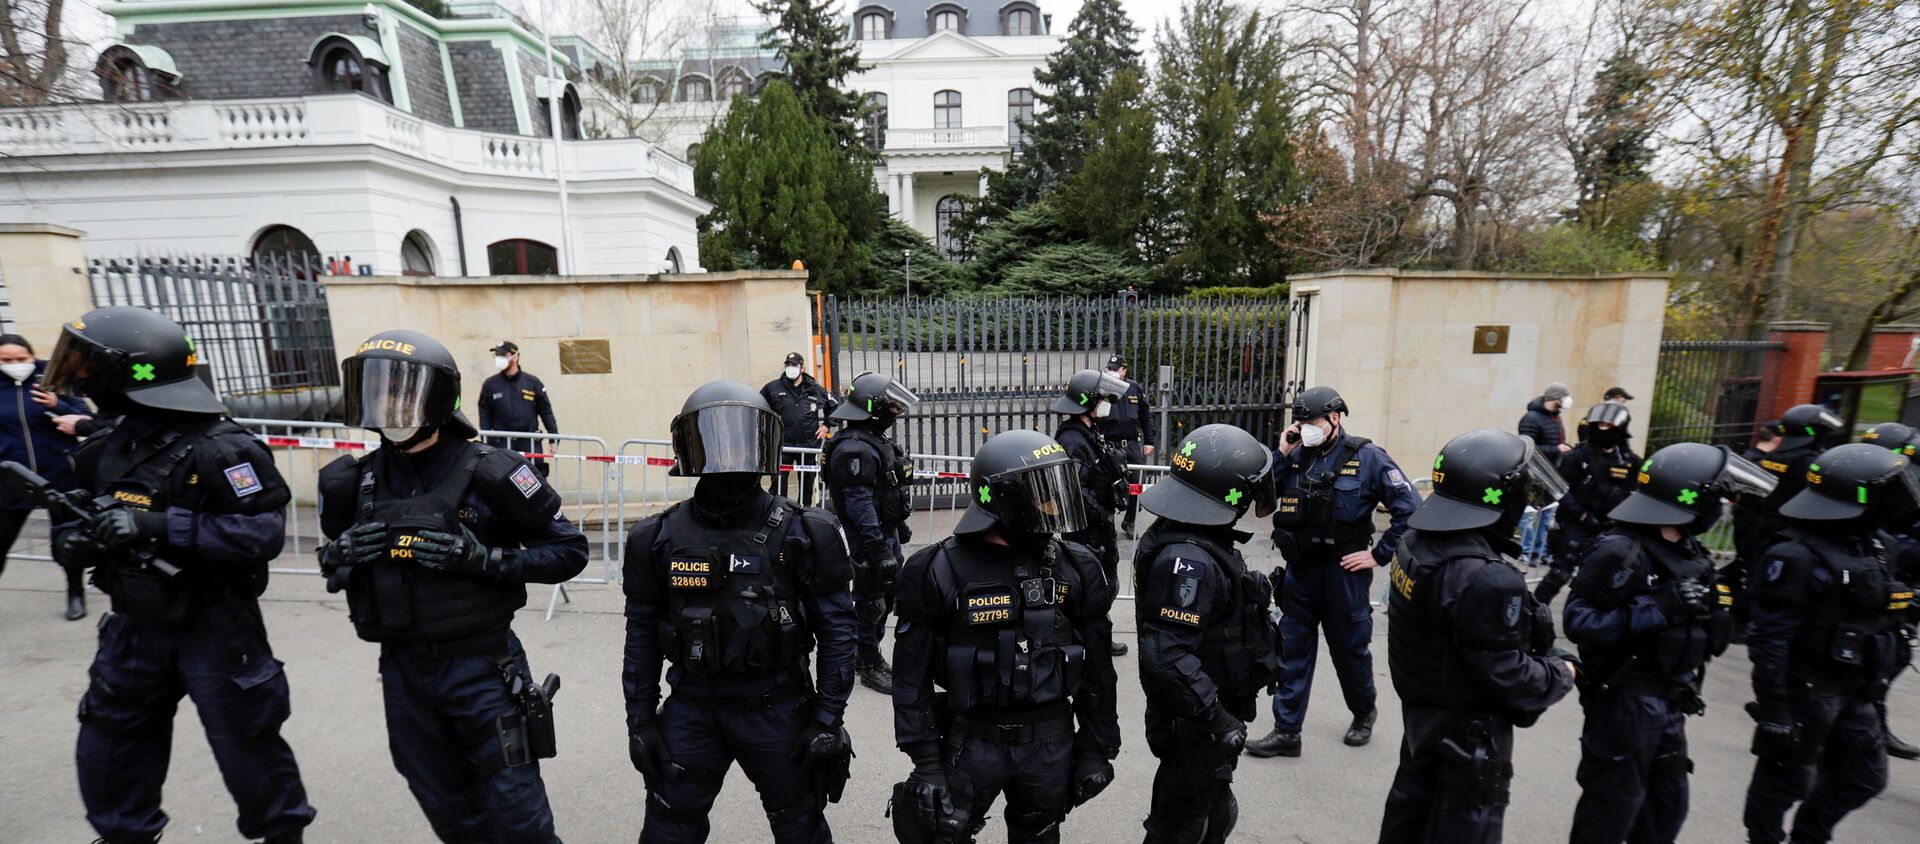 Police officers stand outside the Russian Embassy during a protest over Russian intelligence services alleged involvement in an ammunition depot explosion in Vrbetice area in 2014, in Prague, Czech Republic April 18, 2021. - Sputnik International, 1920, 02.05.2021